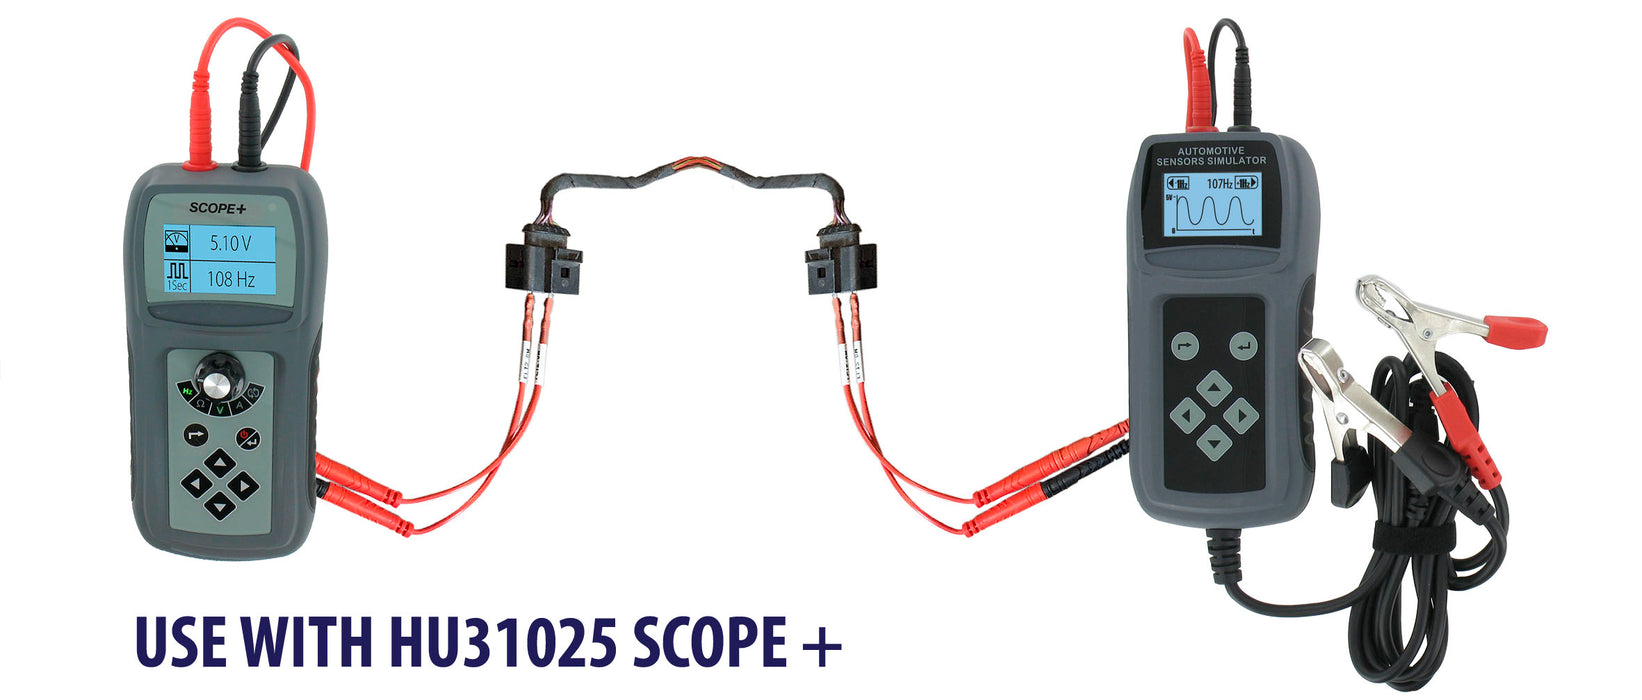 Hubitools Scope+ Automotive Electrical Circuit Troubleshooter Meter